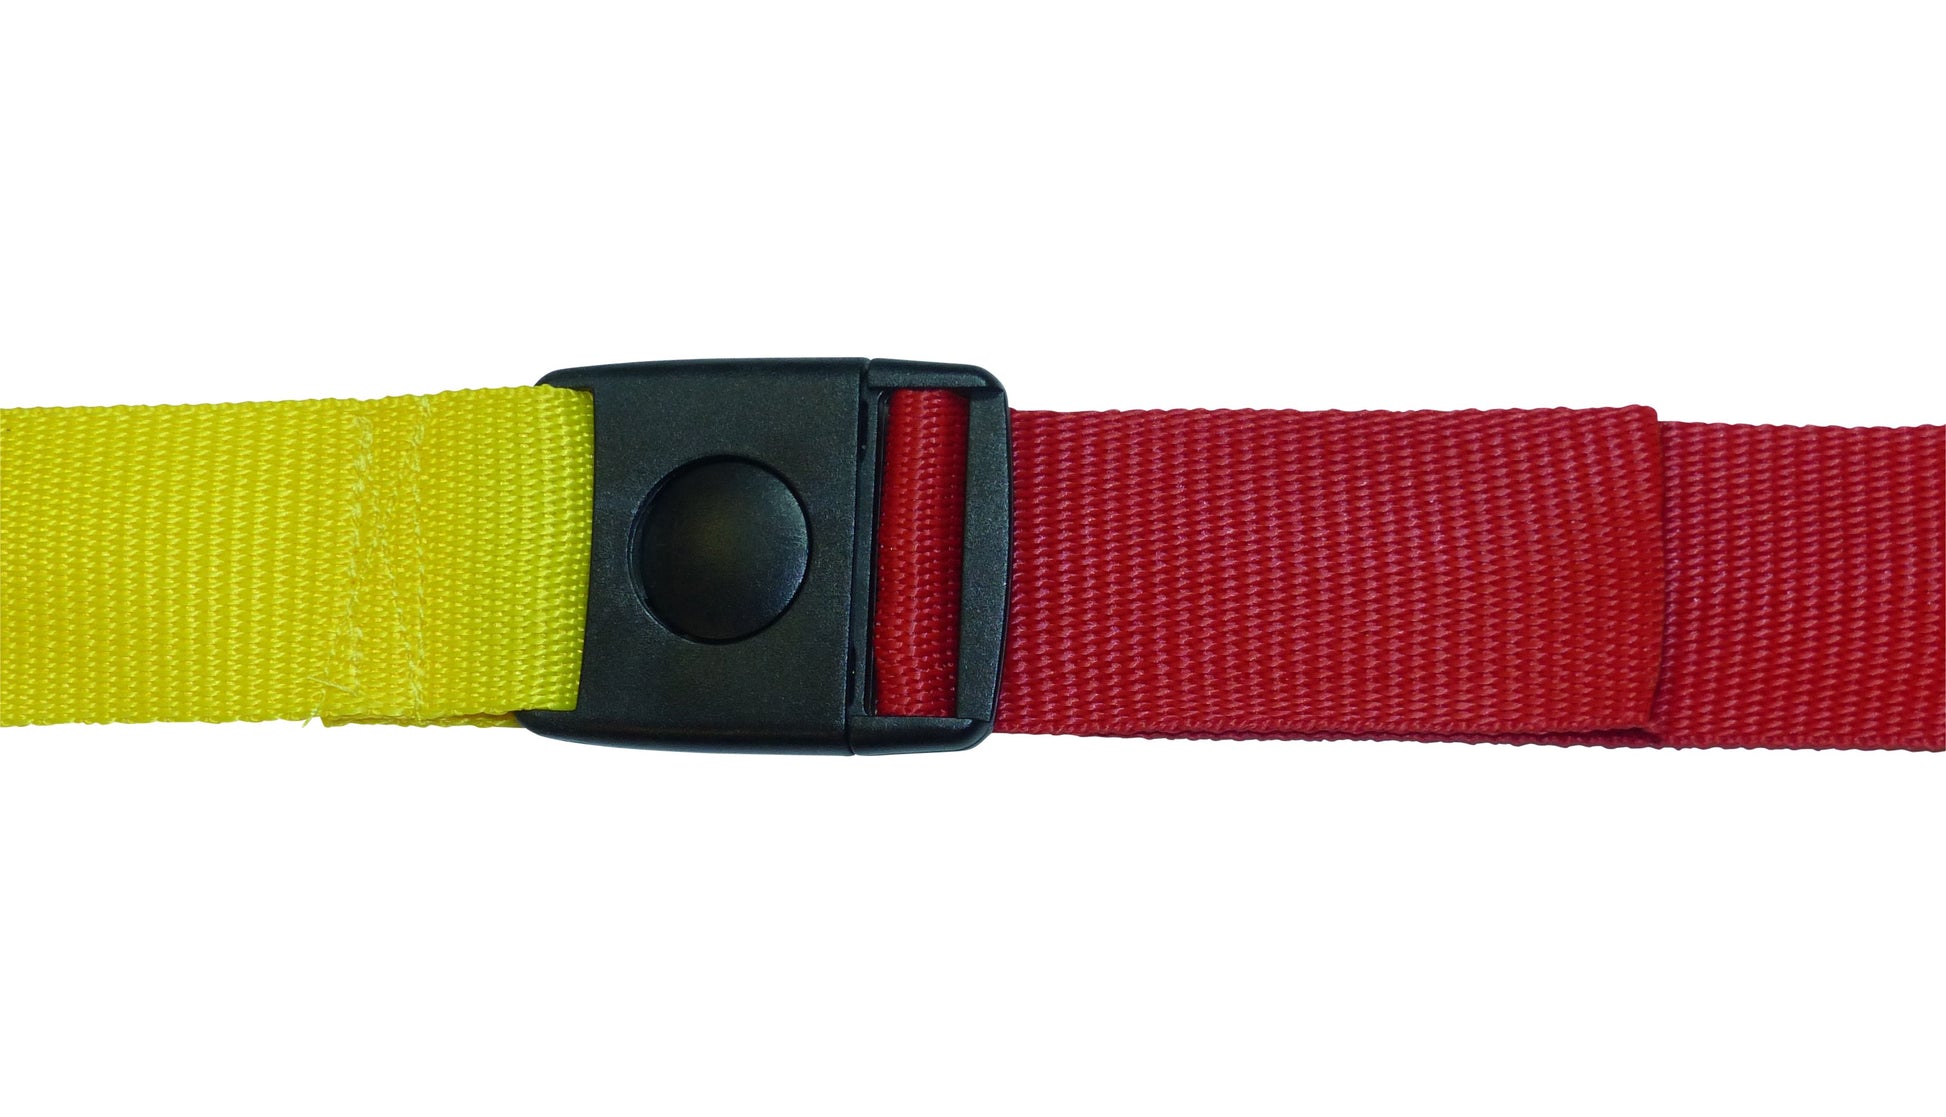 Benristraps 38mm button centre release buckle on webbing